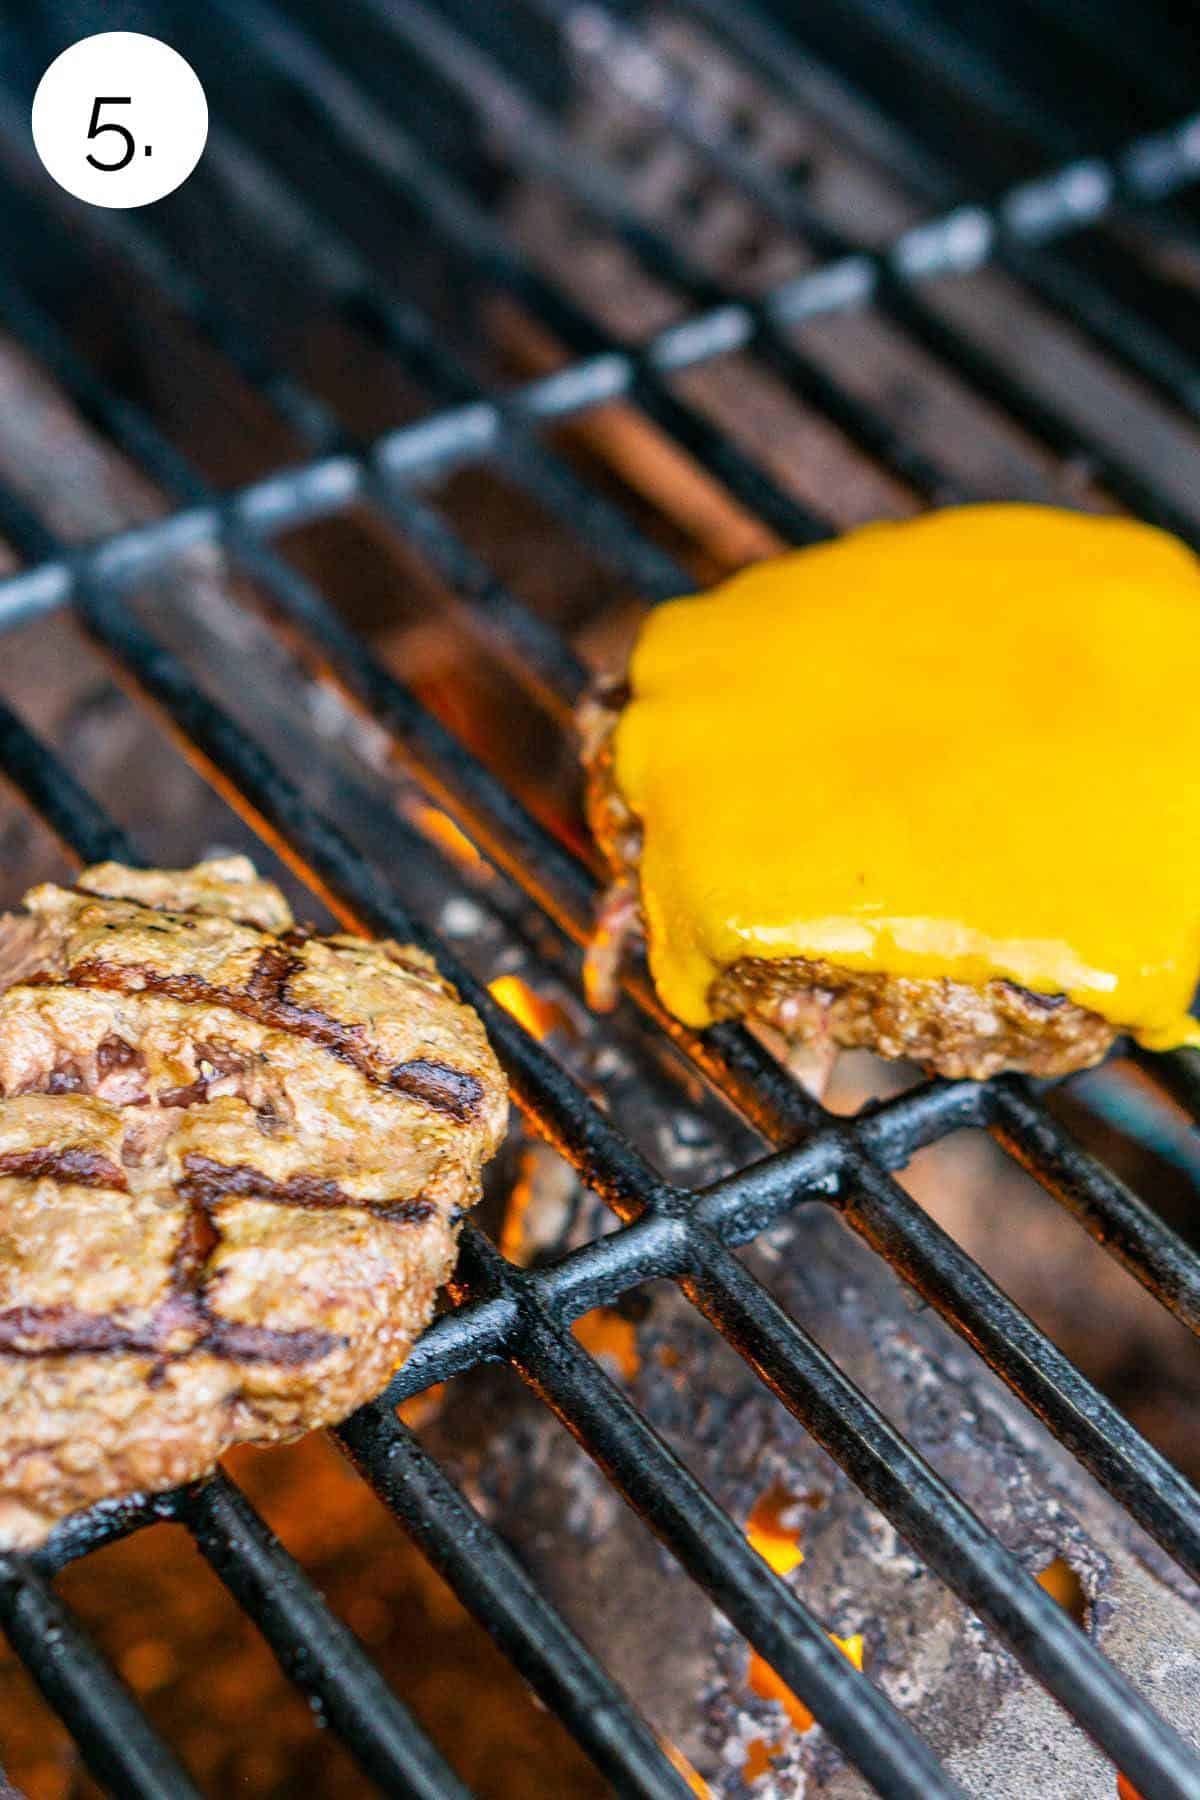 The burgers on the grill with a slice of cheddar cheese on top of one patty.